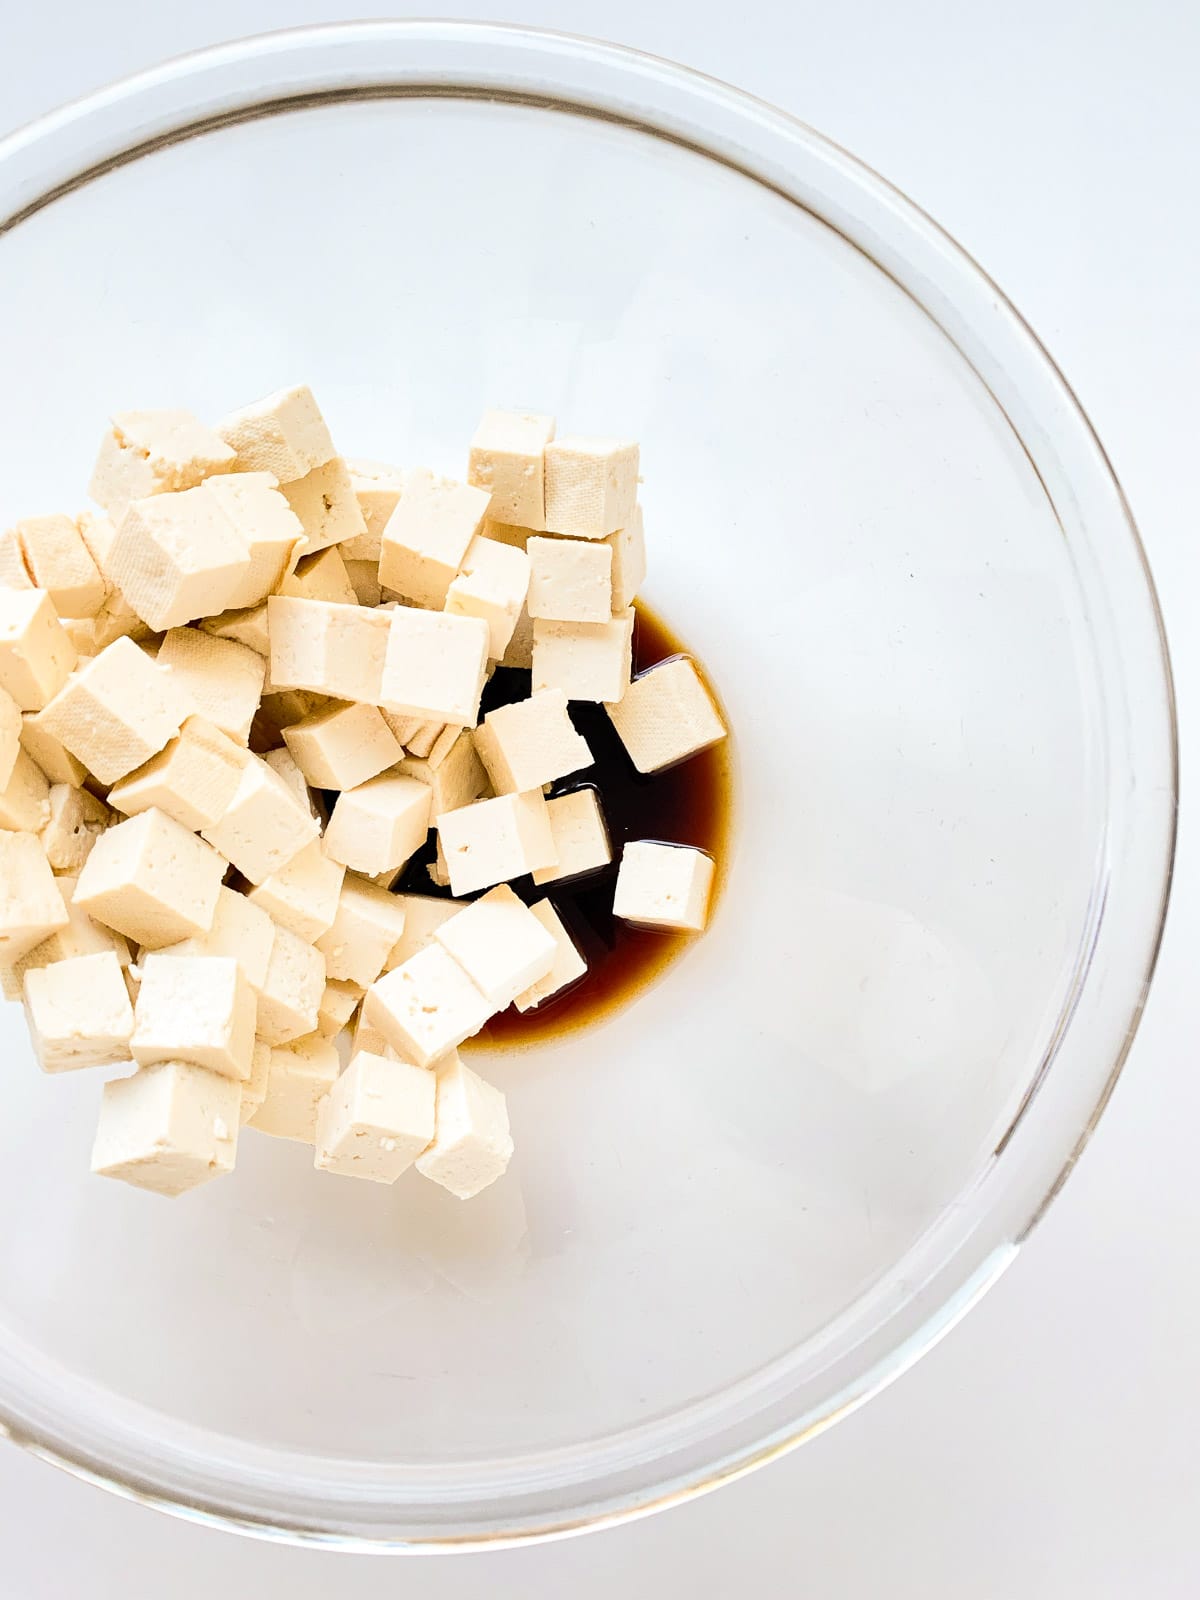 An image of tofu cubes in a glass bowl with a marinade.